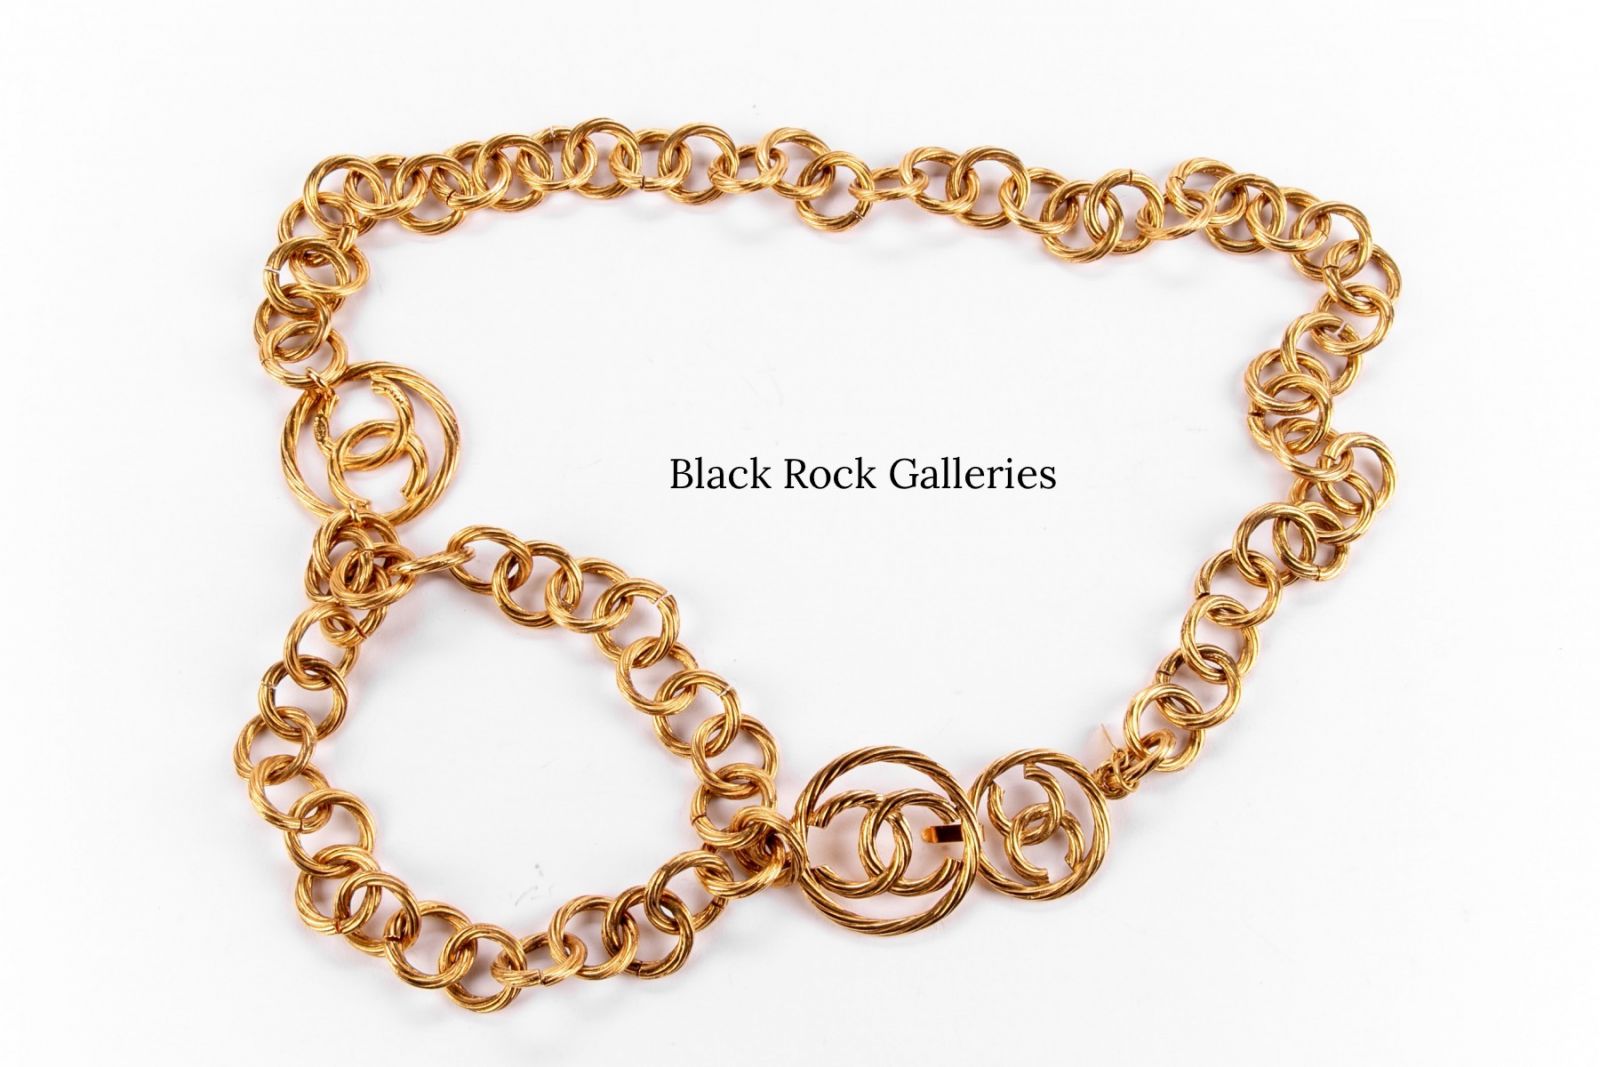 Classic Chanel chain belt with gold-tone